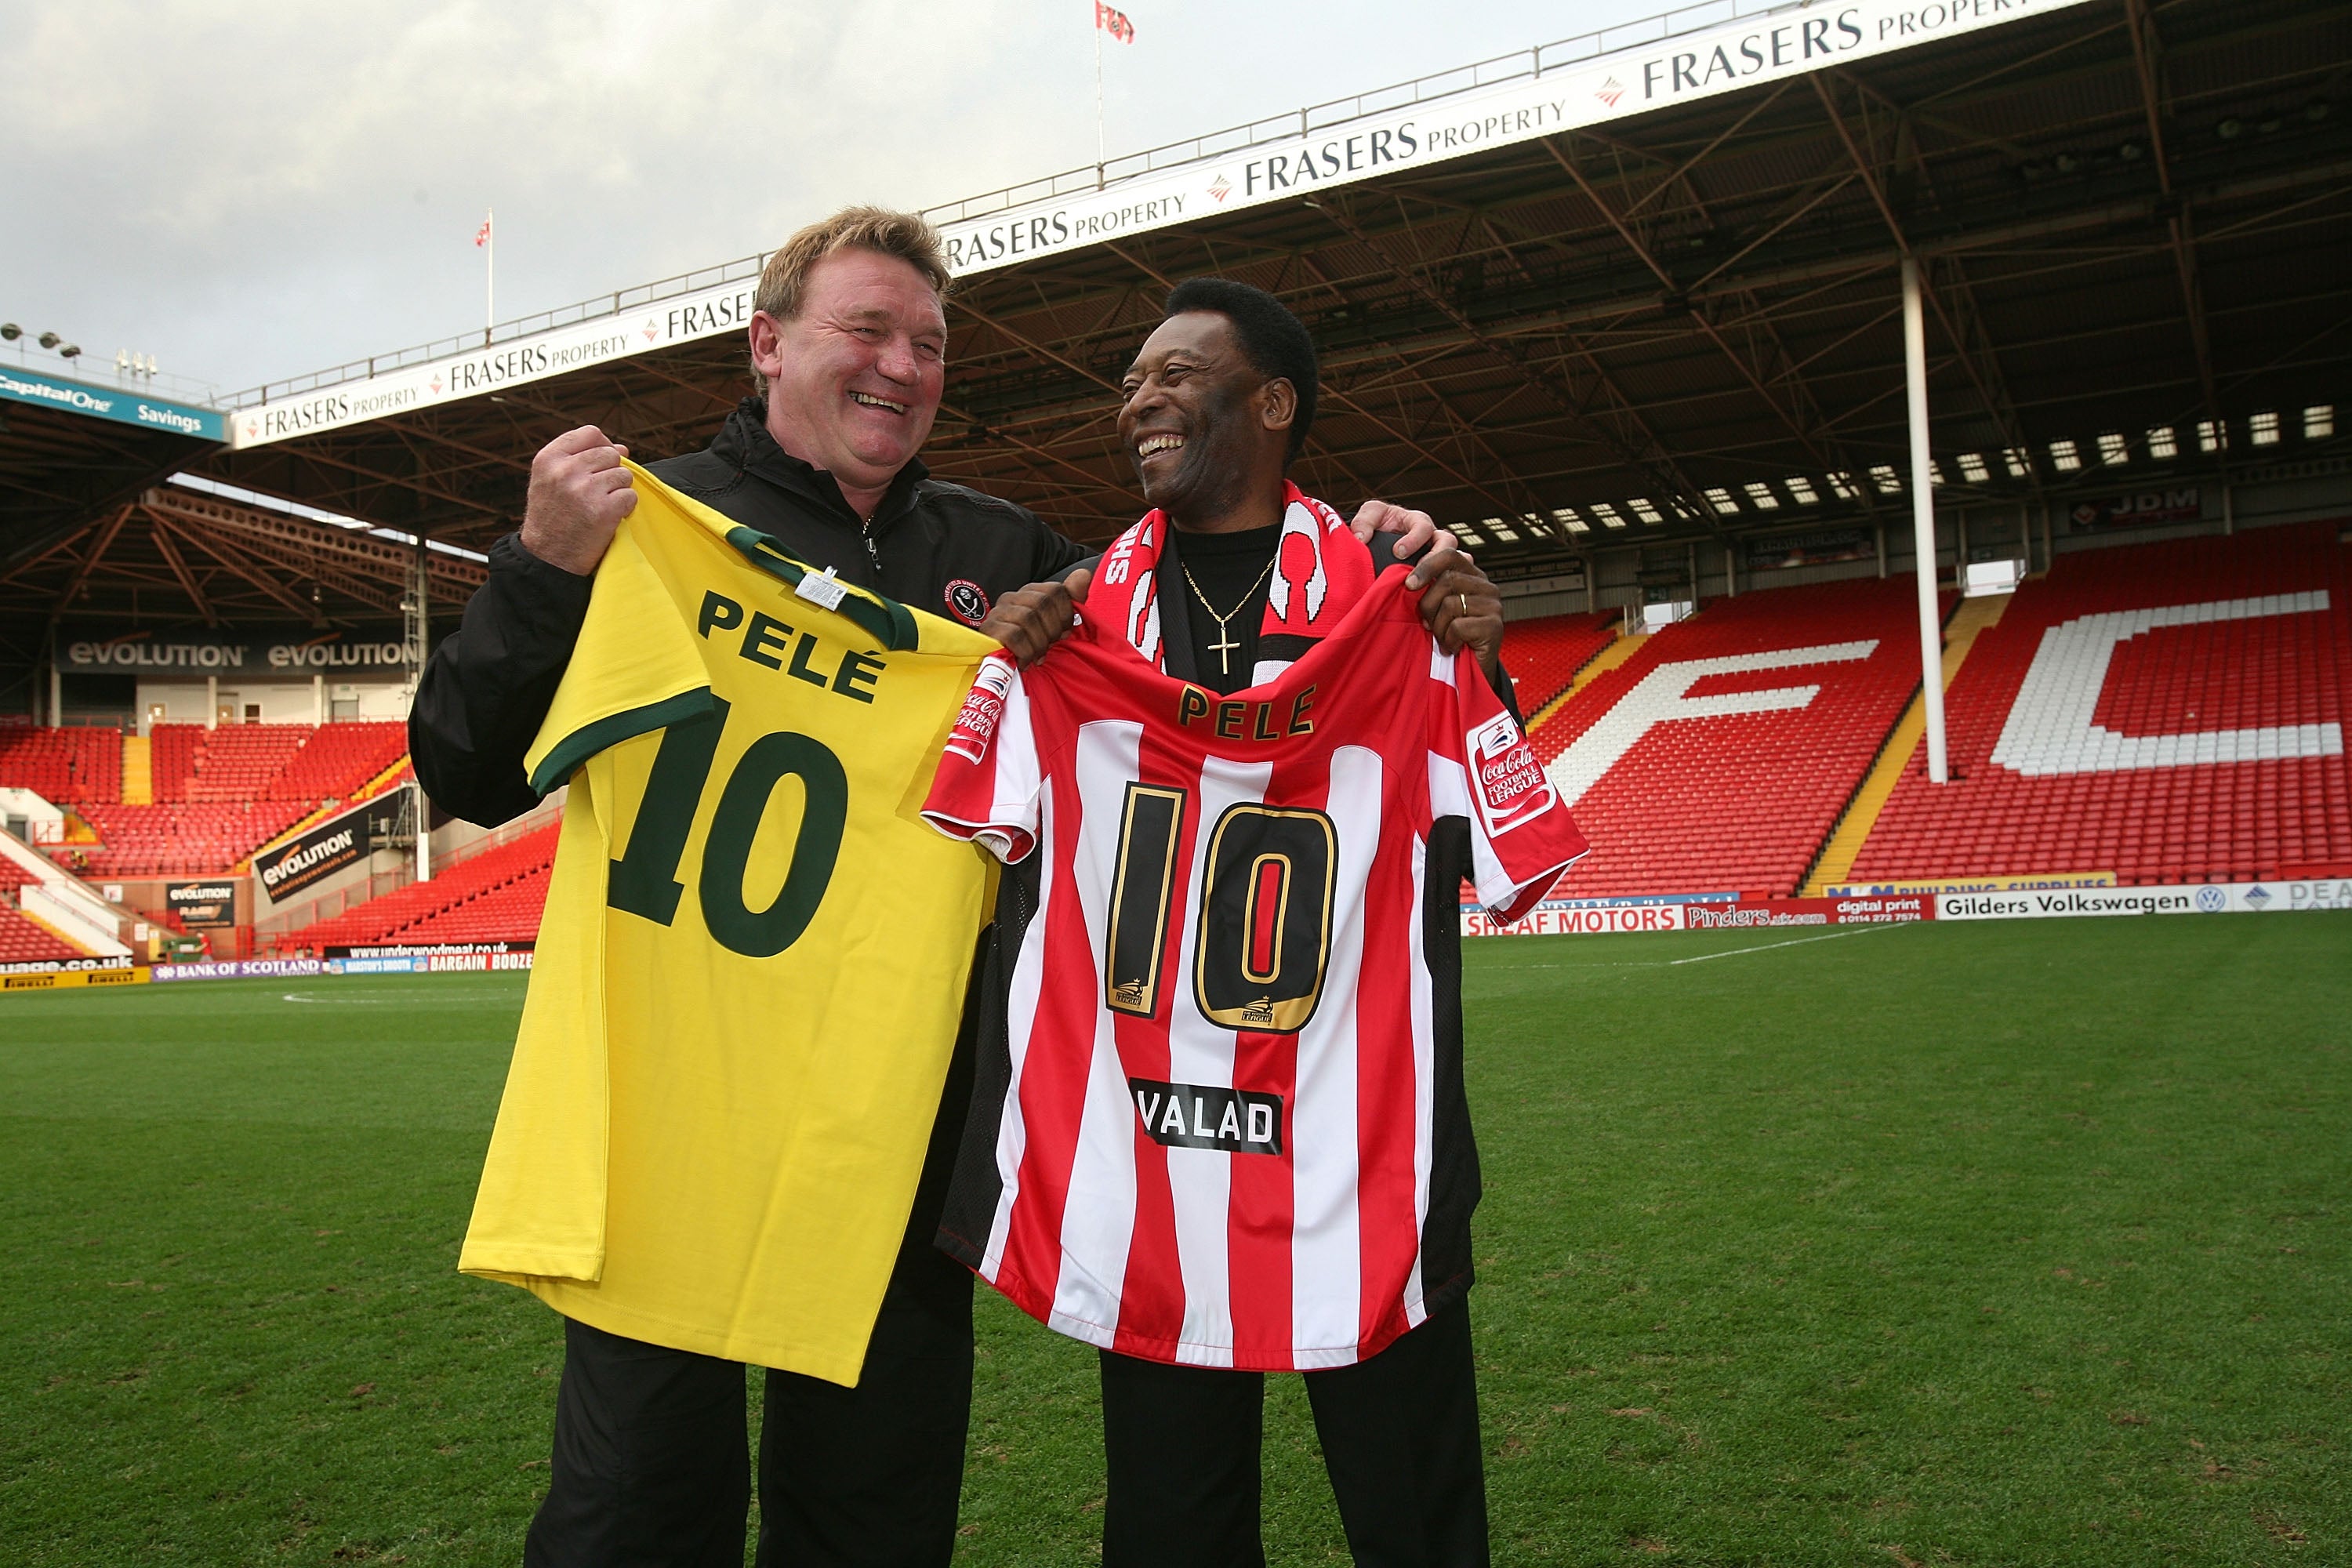 Pele helped mark the 150th anniversary of the world’s oldest football club - Sheffield FC